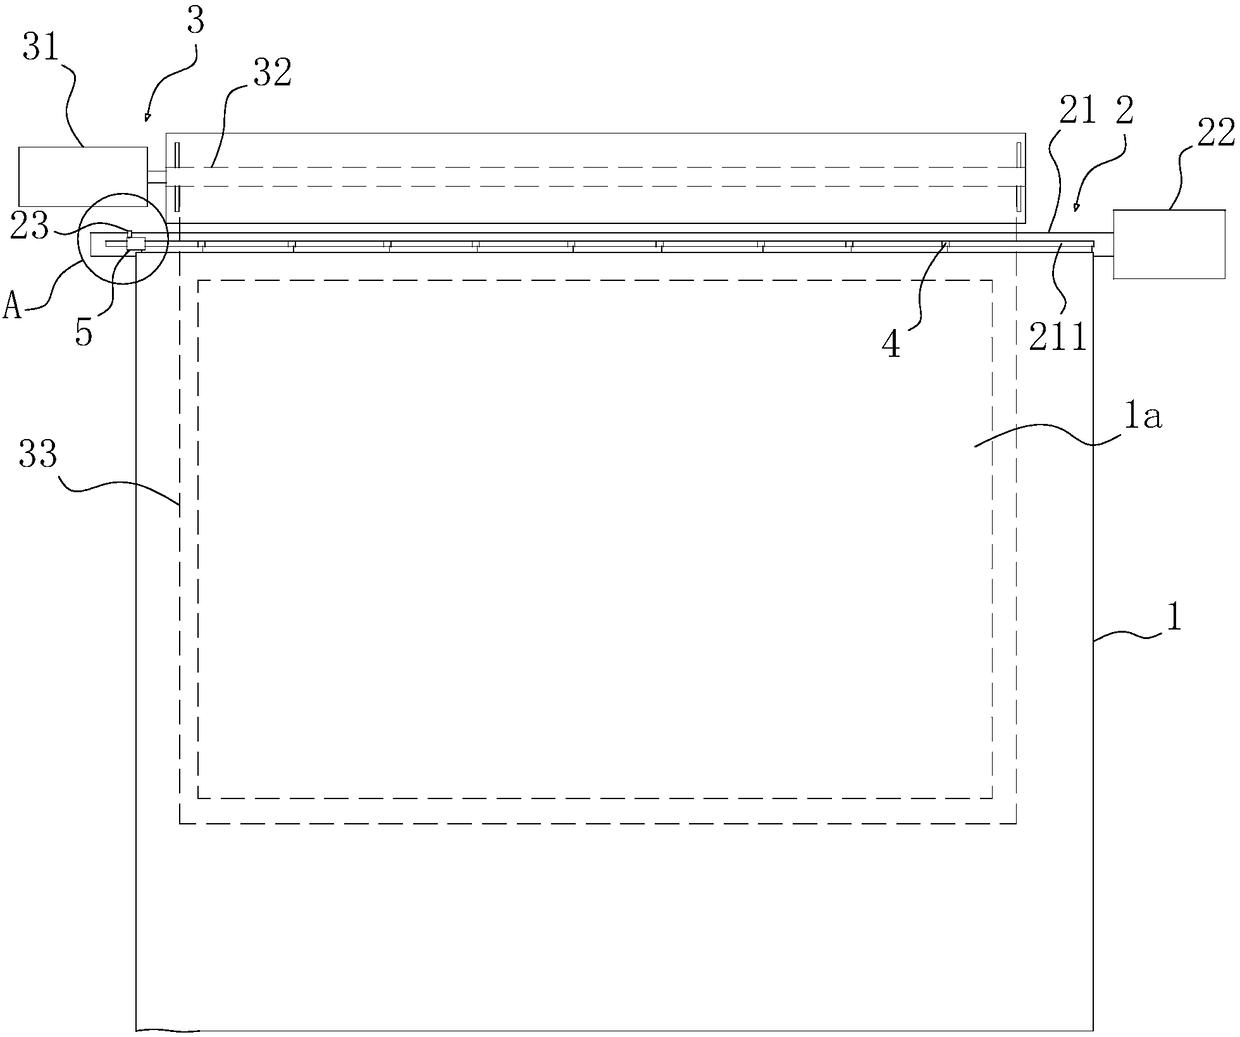 Electric curtain provided with solar power generation device